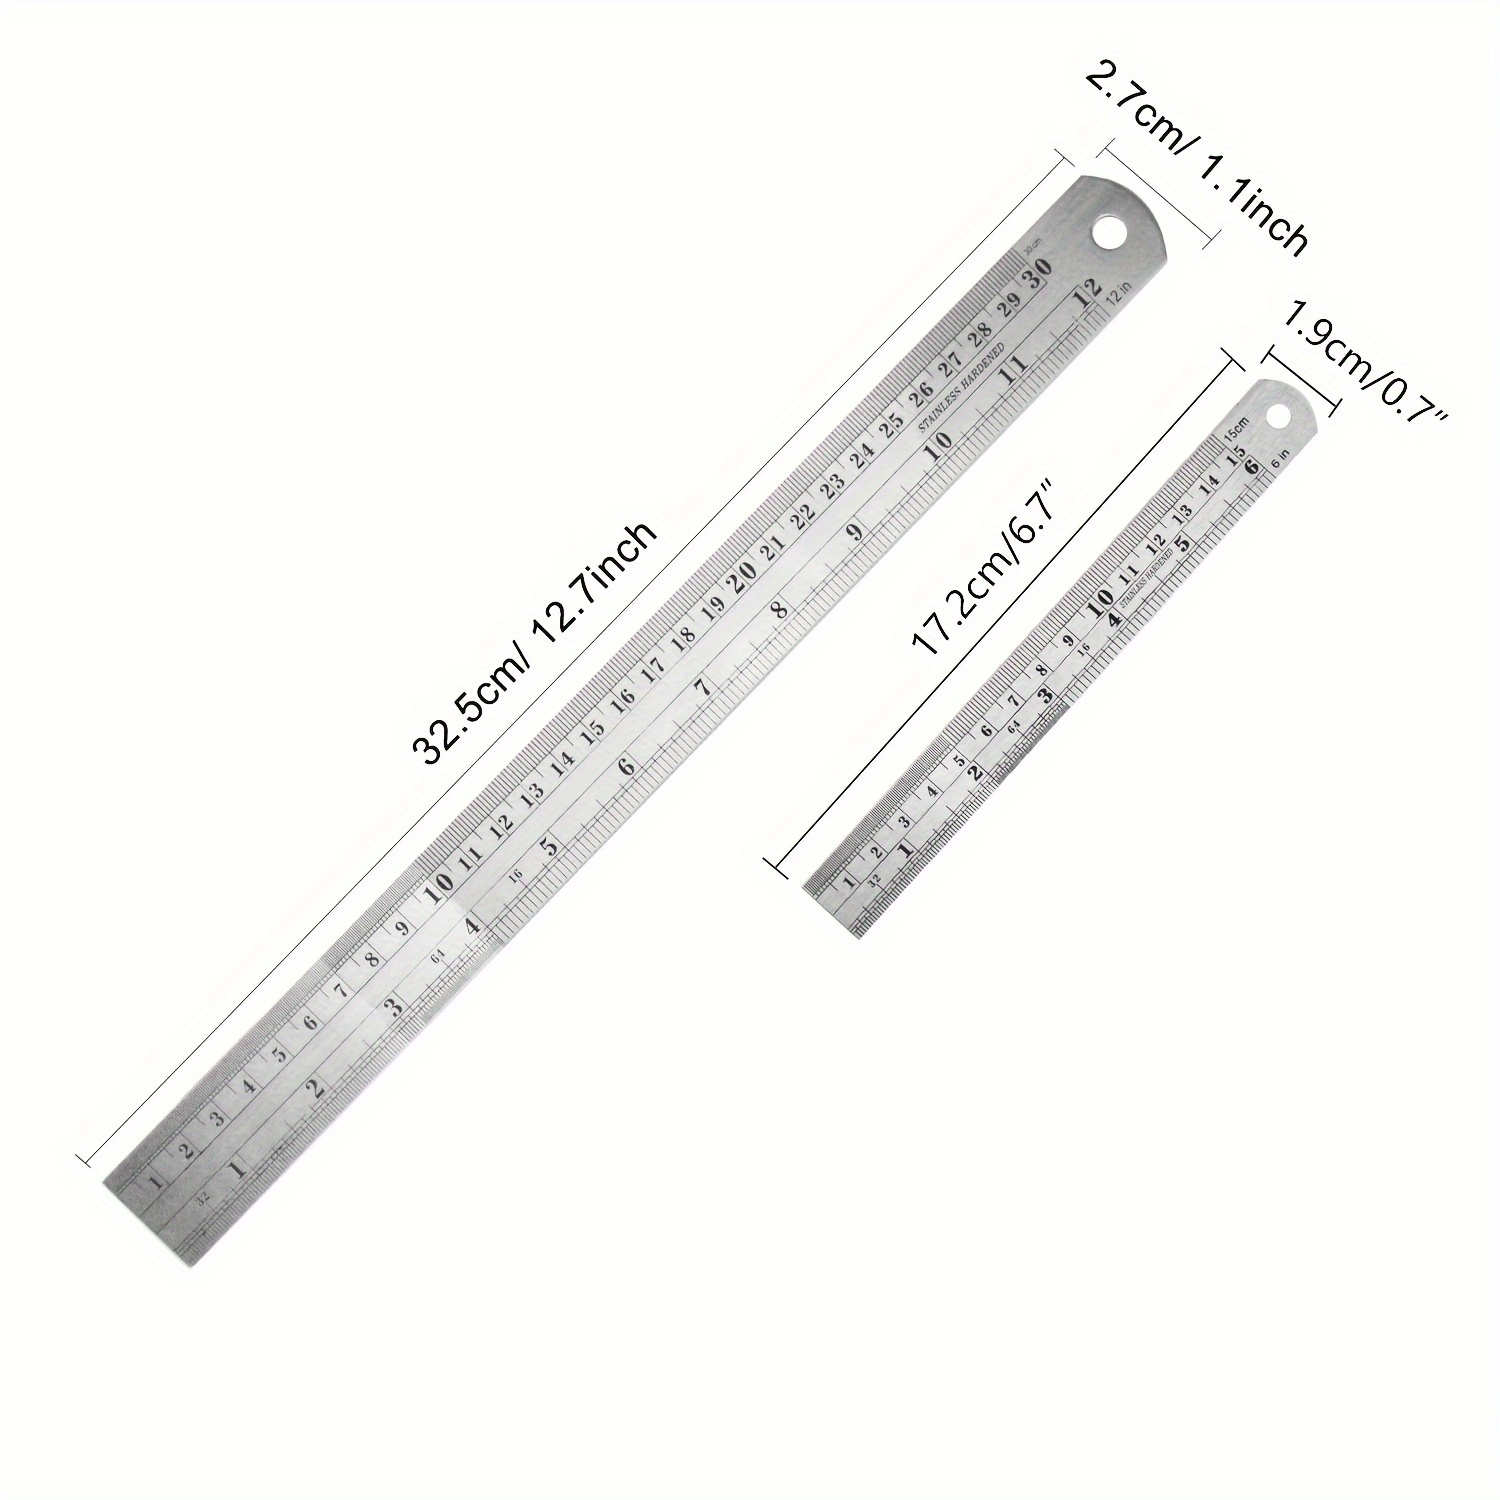 2pcs Ruler with Centimeters and Inches Metal Ruler Straight Ruler Metal  Steel Rulers Machinist Engineer Ruler Rulers 12 Inch Metric Tape Measure